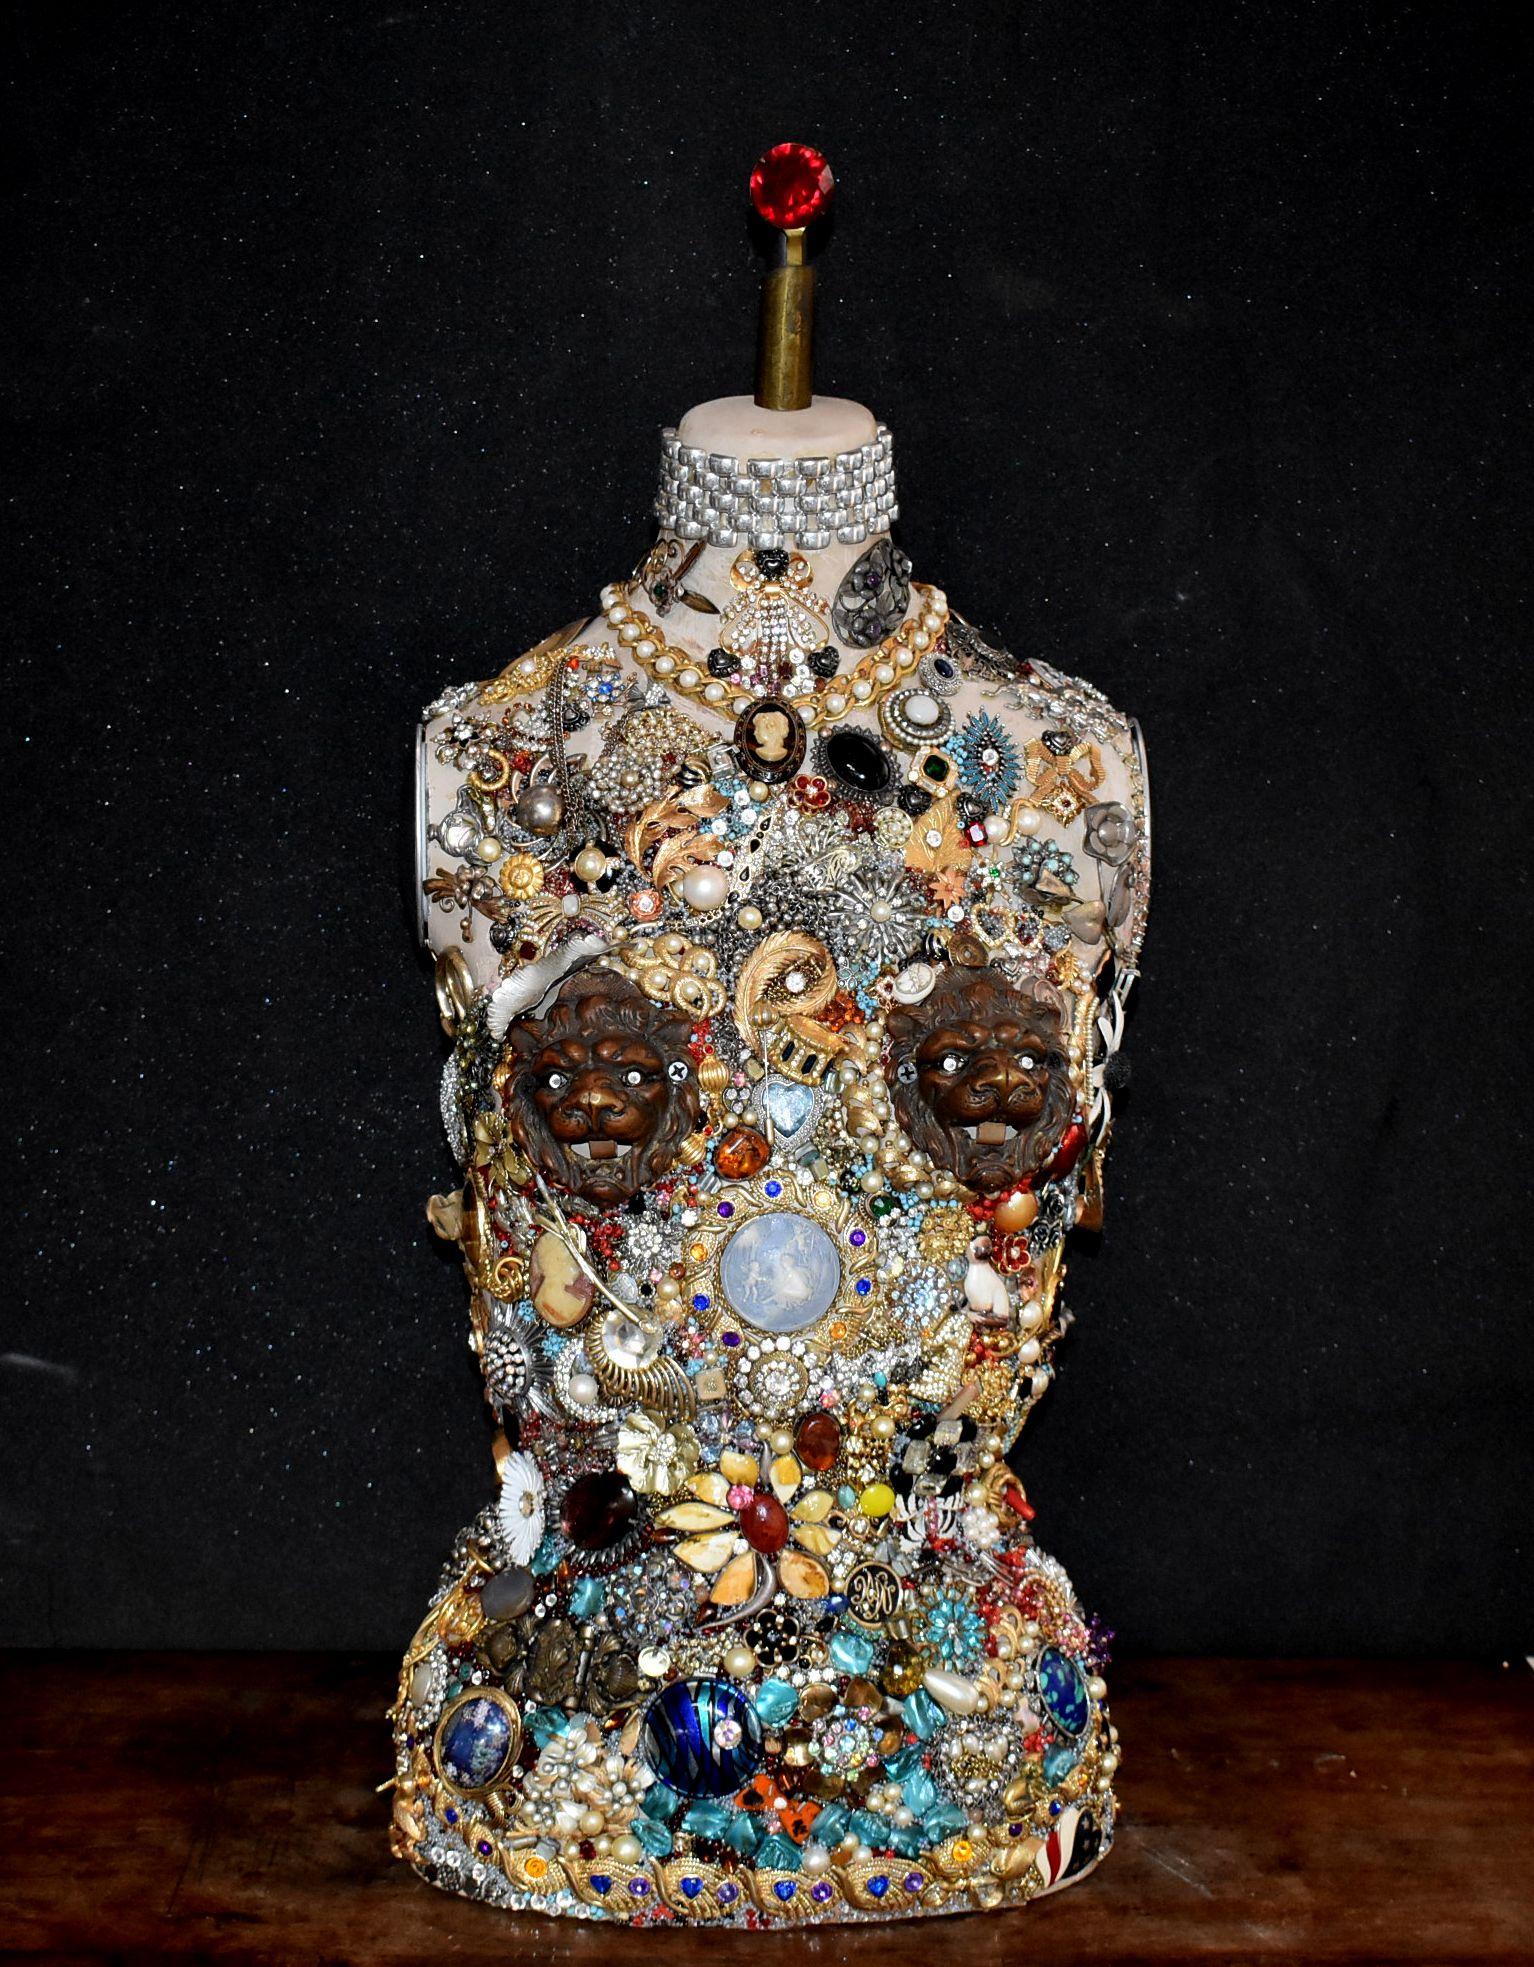 A very unique mannequin cover with vintage costume jewelry design by French artist Daniel Dupir Title 